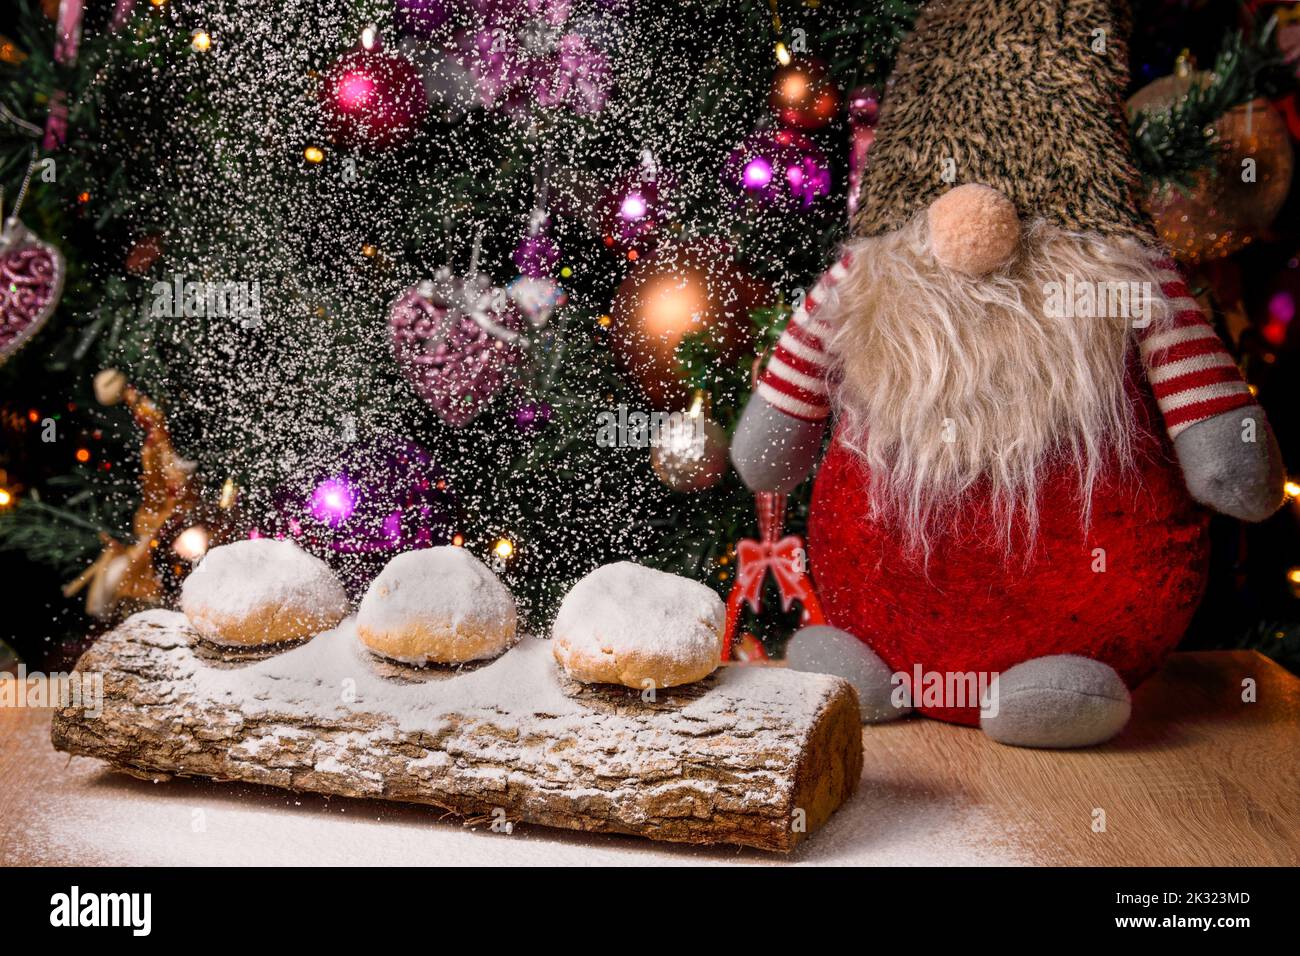 Cookies (kourabies)  with powdered sugar.  GreekTraditional Christmas sweet on a tree trunk, with a background of a Christmas tree and a toy gnome Stock Photo